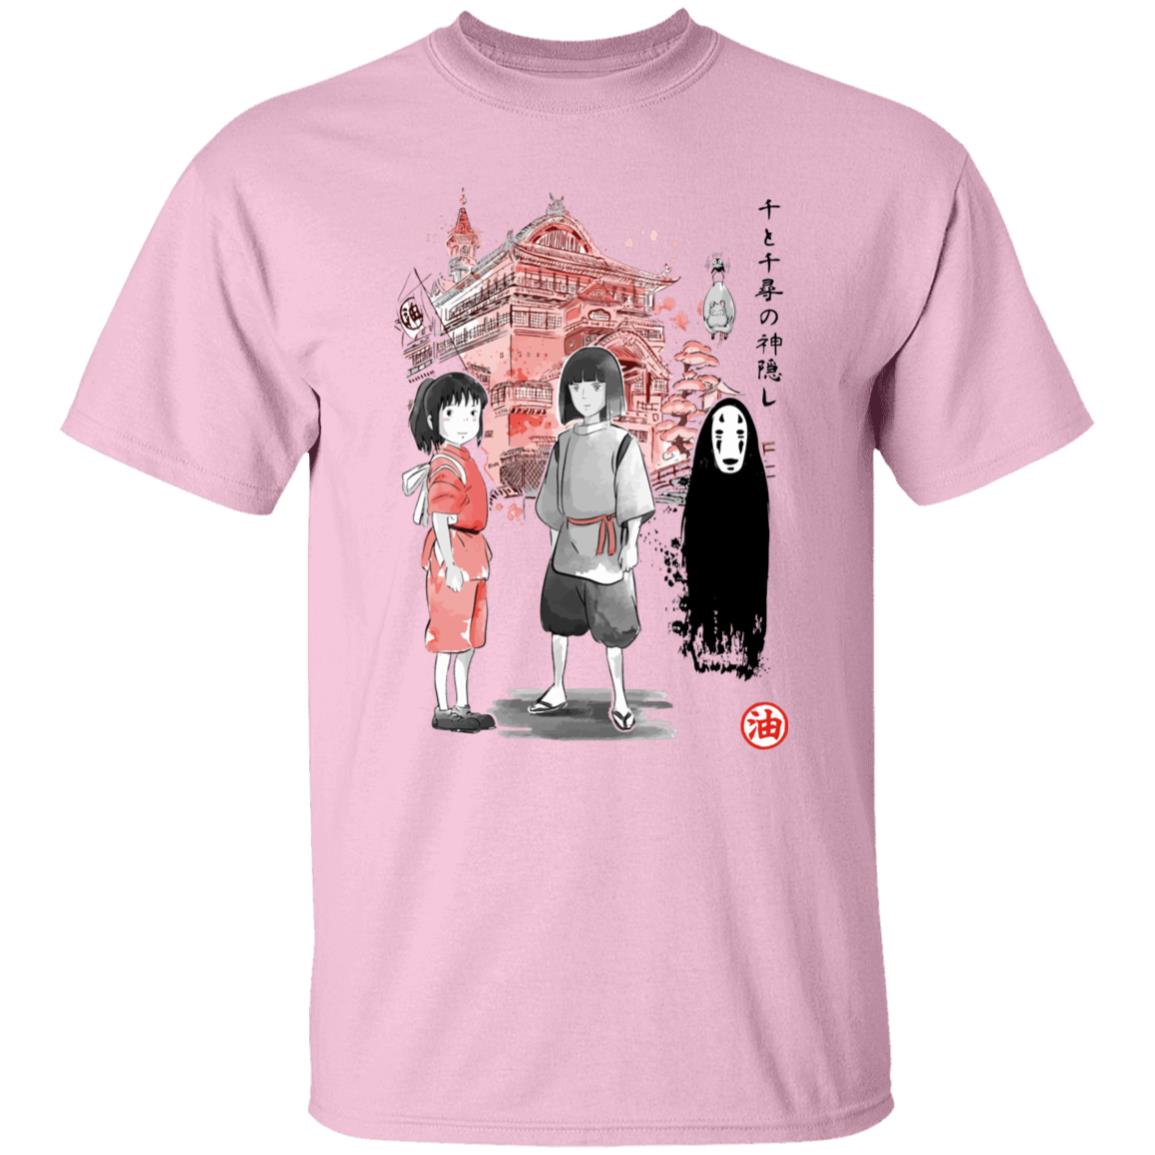 Spirited Away – Sen and Friends by the Bathhouse T Shirt